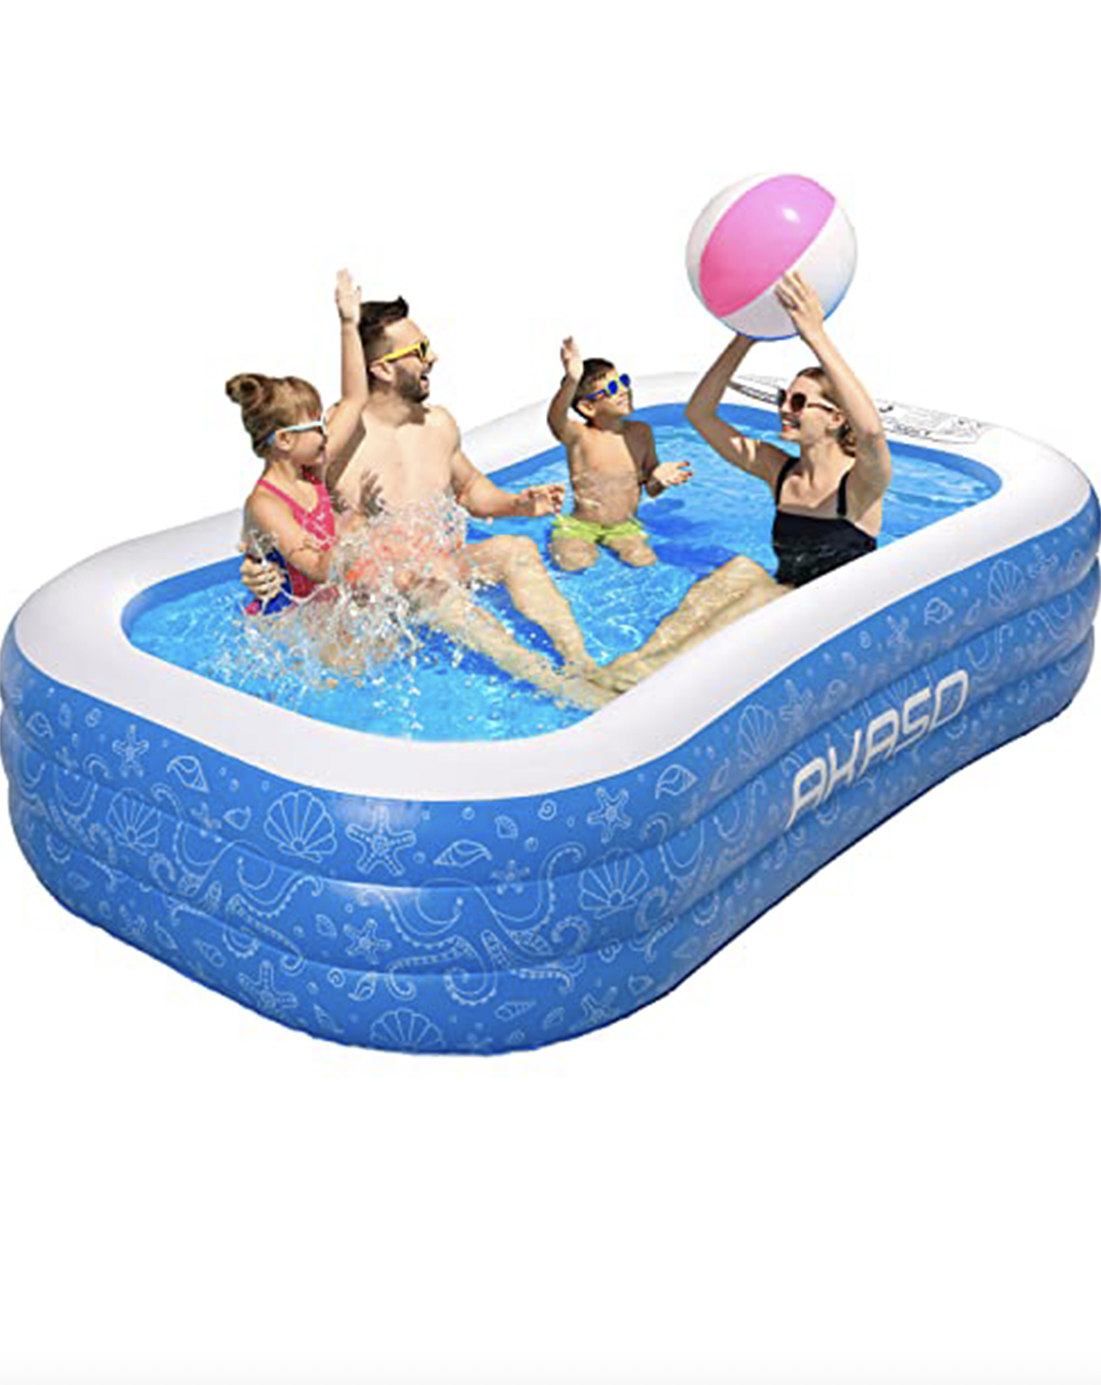 Honeydrill Inflatable Swimming Pool Family Backyard Pool Lovely Size for Kids Garden Good Choice for Backyard Water Party 120x72x20 inches Outdoor 